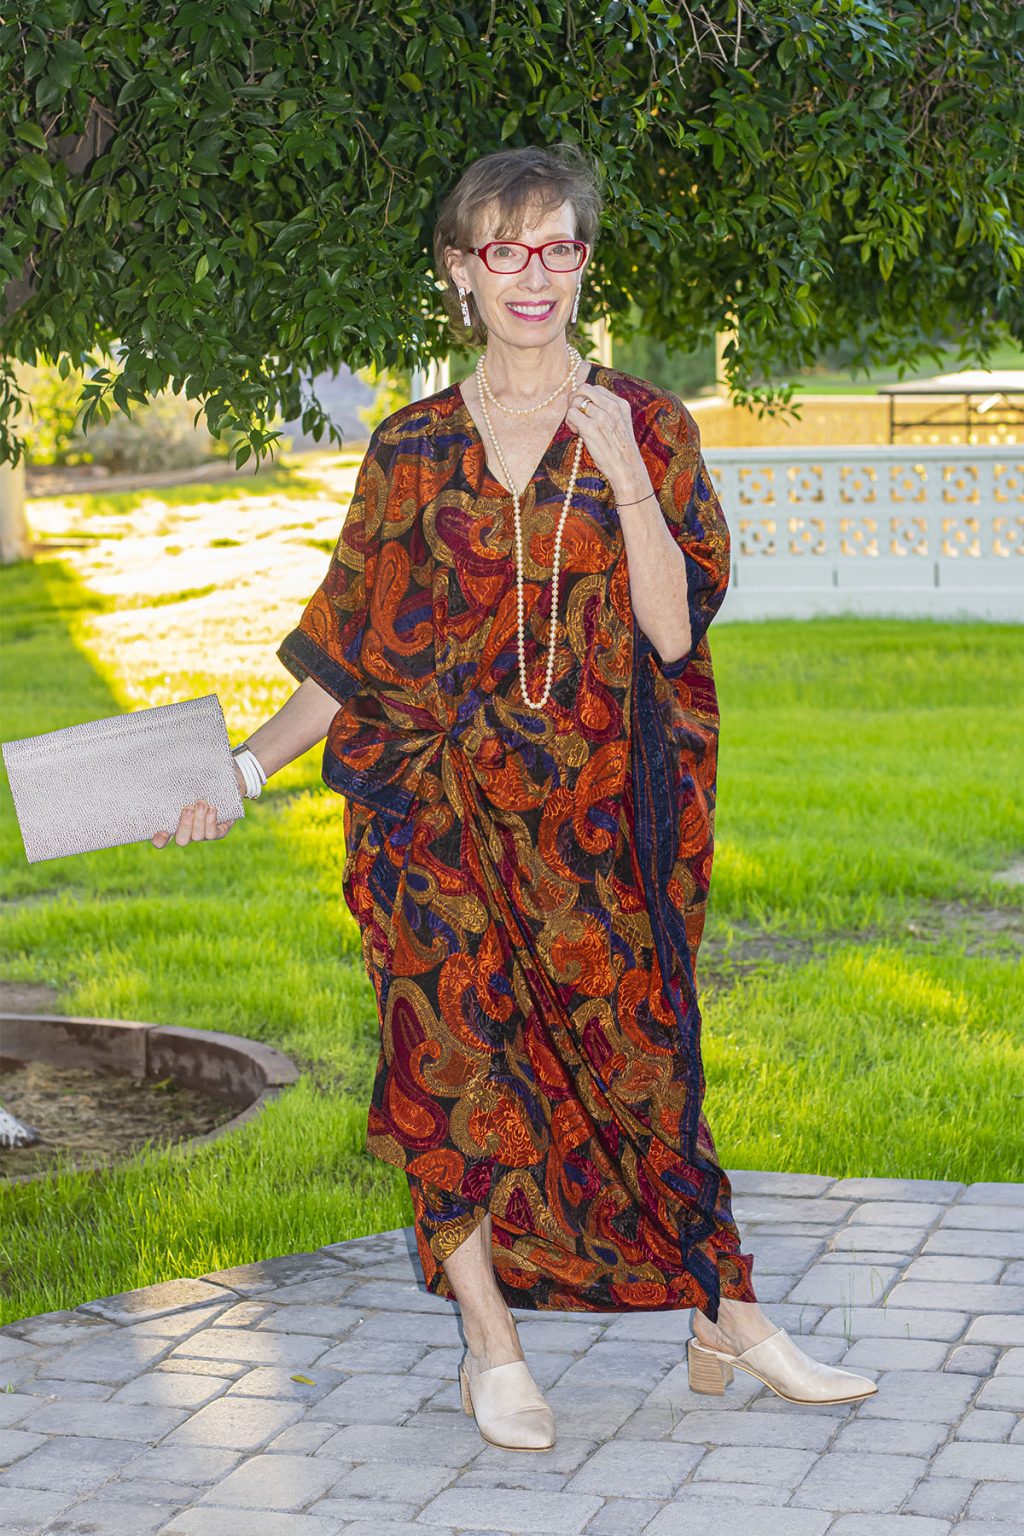 6 Incredible Ideas: How to Style a Caftan